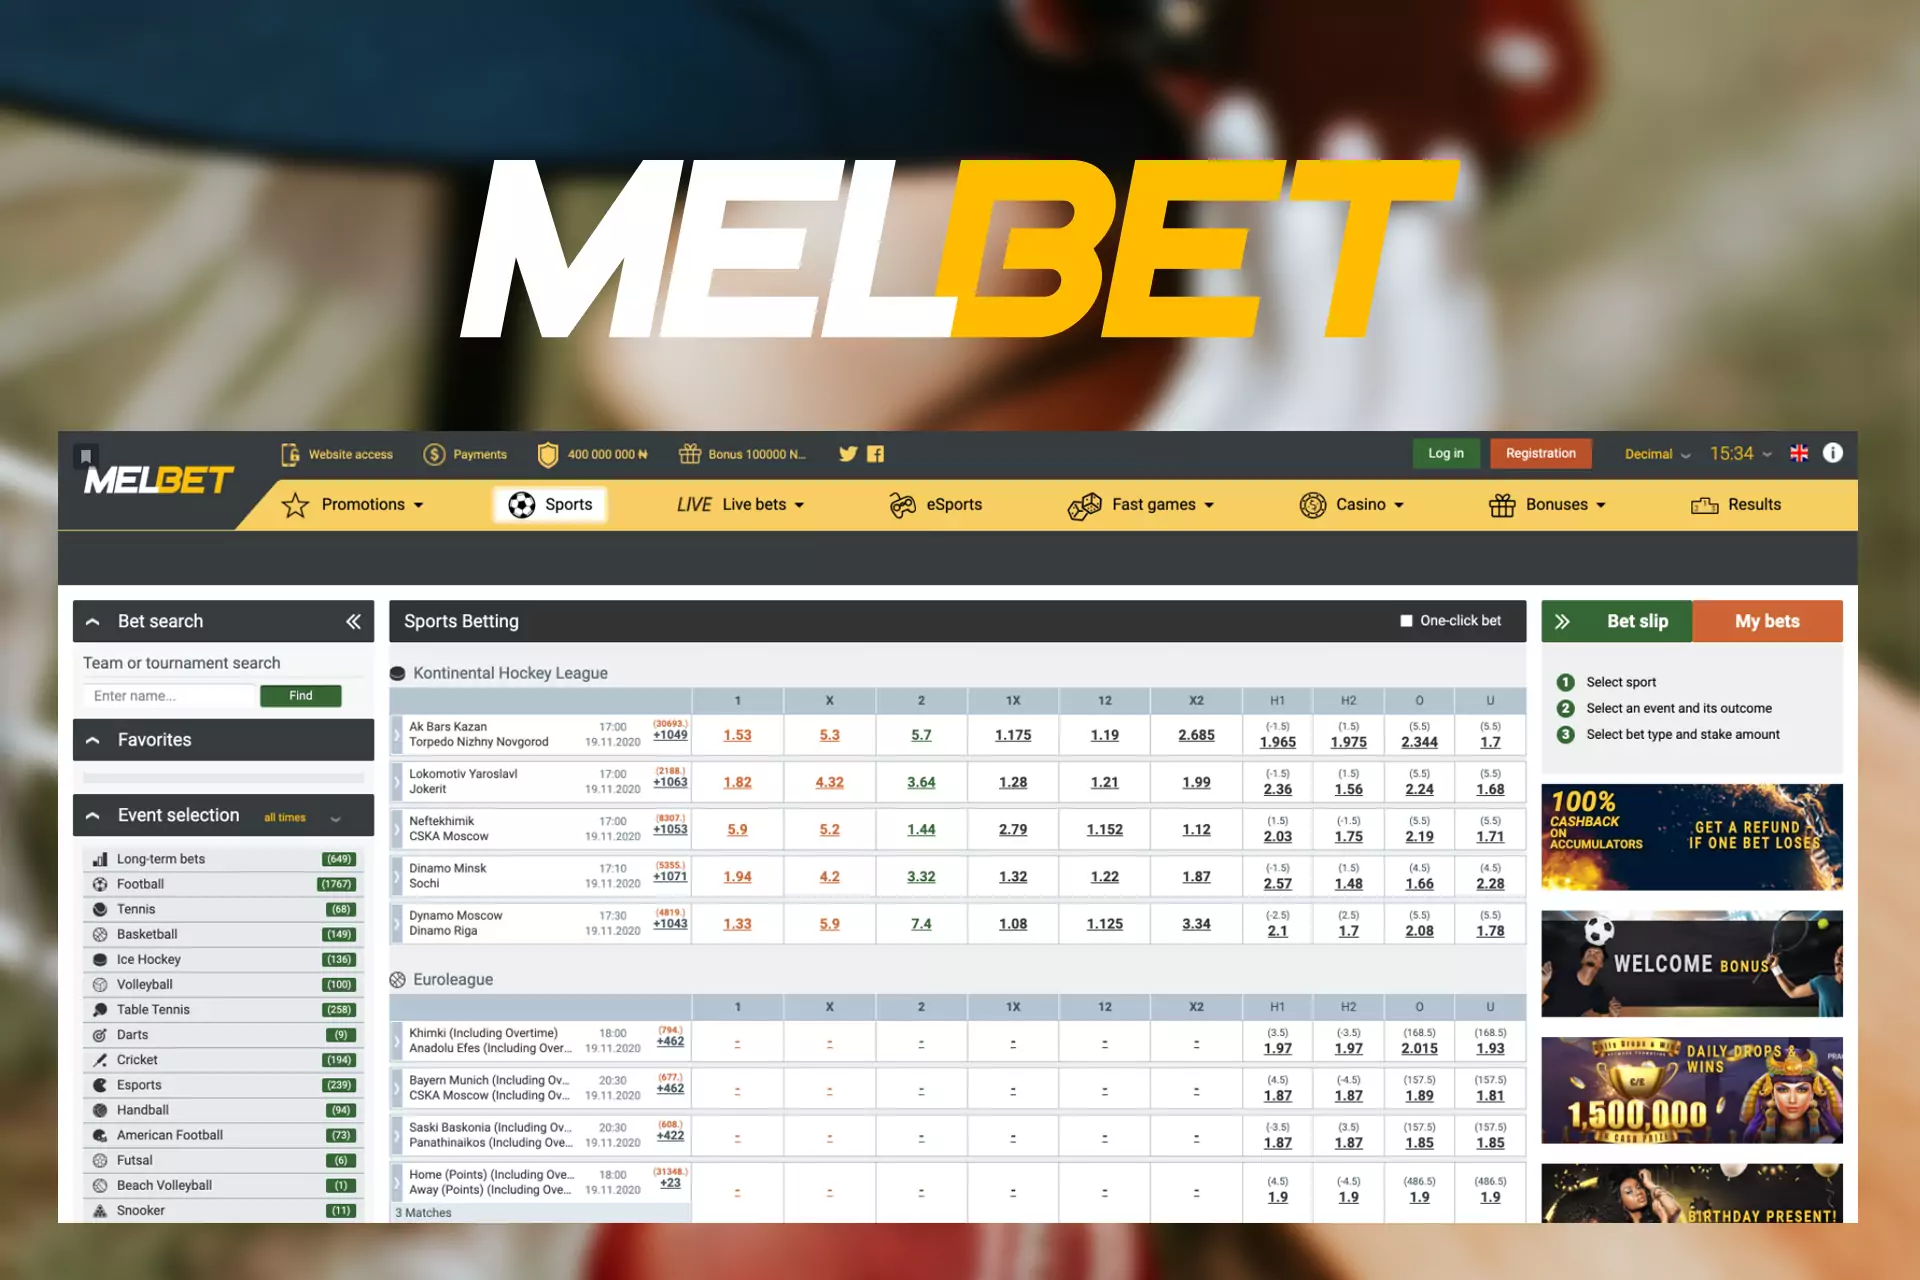 Make your first cricket bet in Melbet by following the instructions.